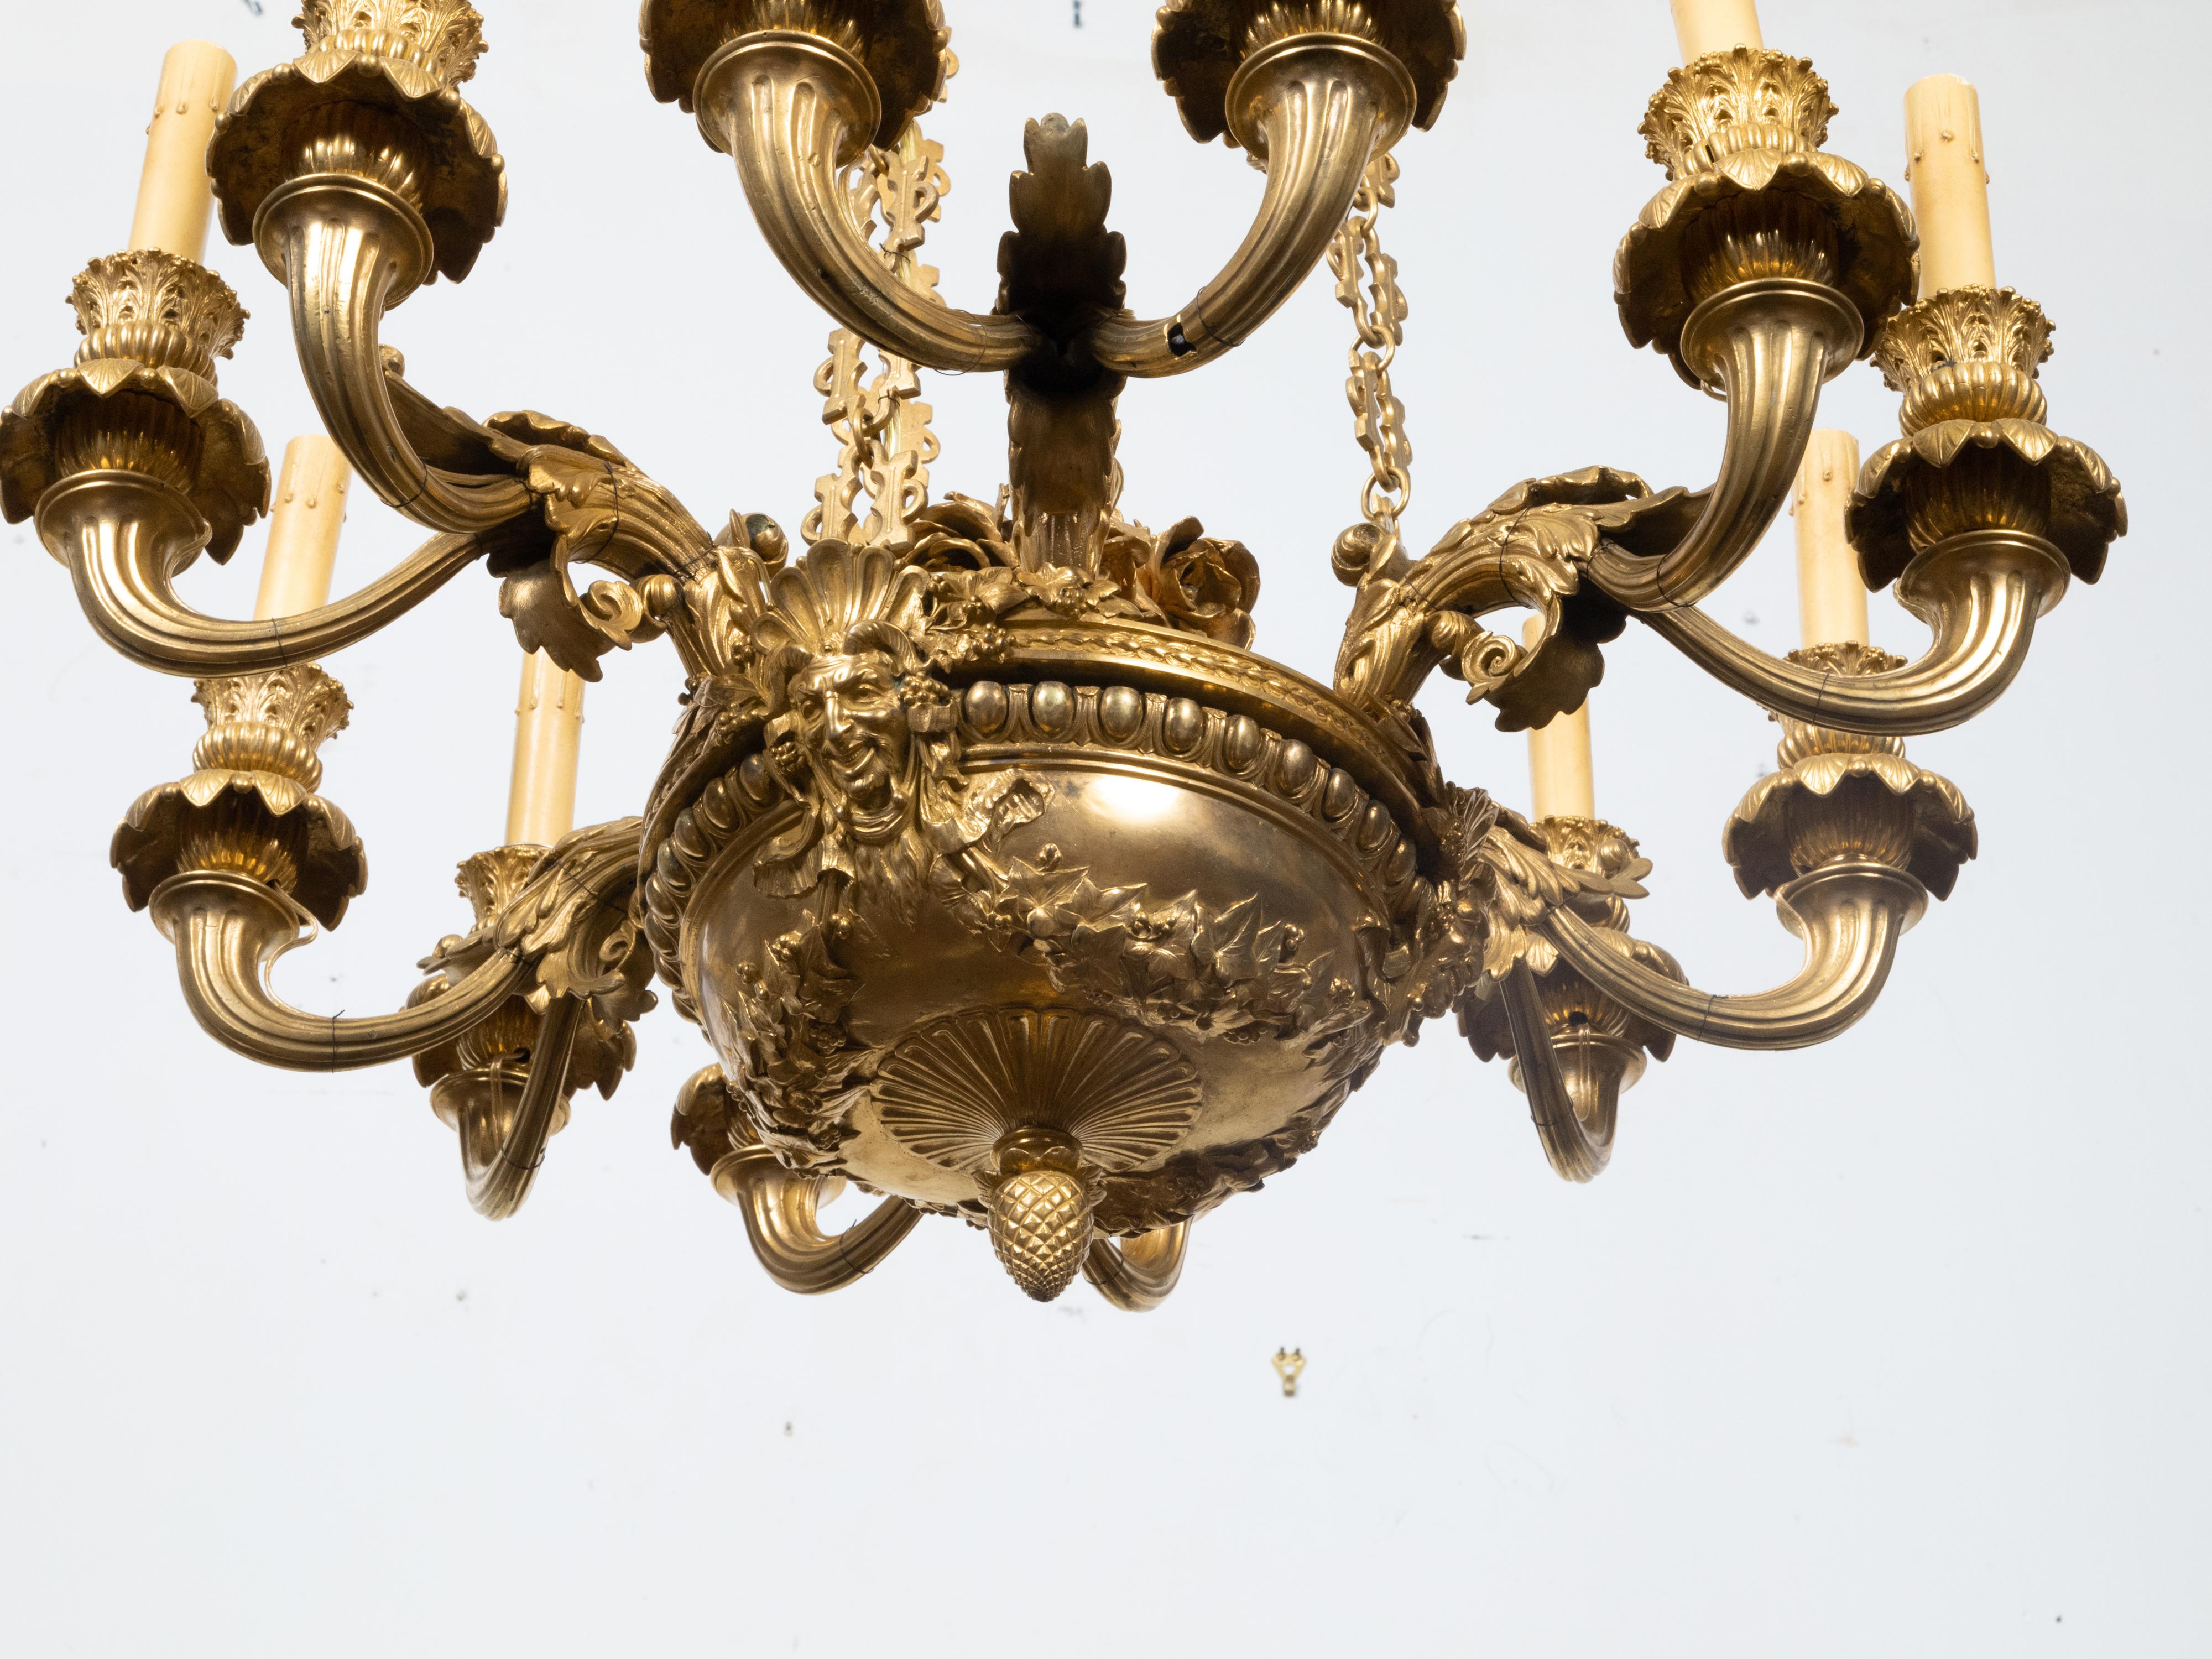 French Napoléon III 19th Century Gilt Bronze 12 Light Chandelier with Mascarons For Sale 6